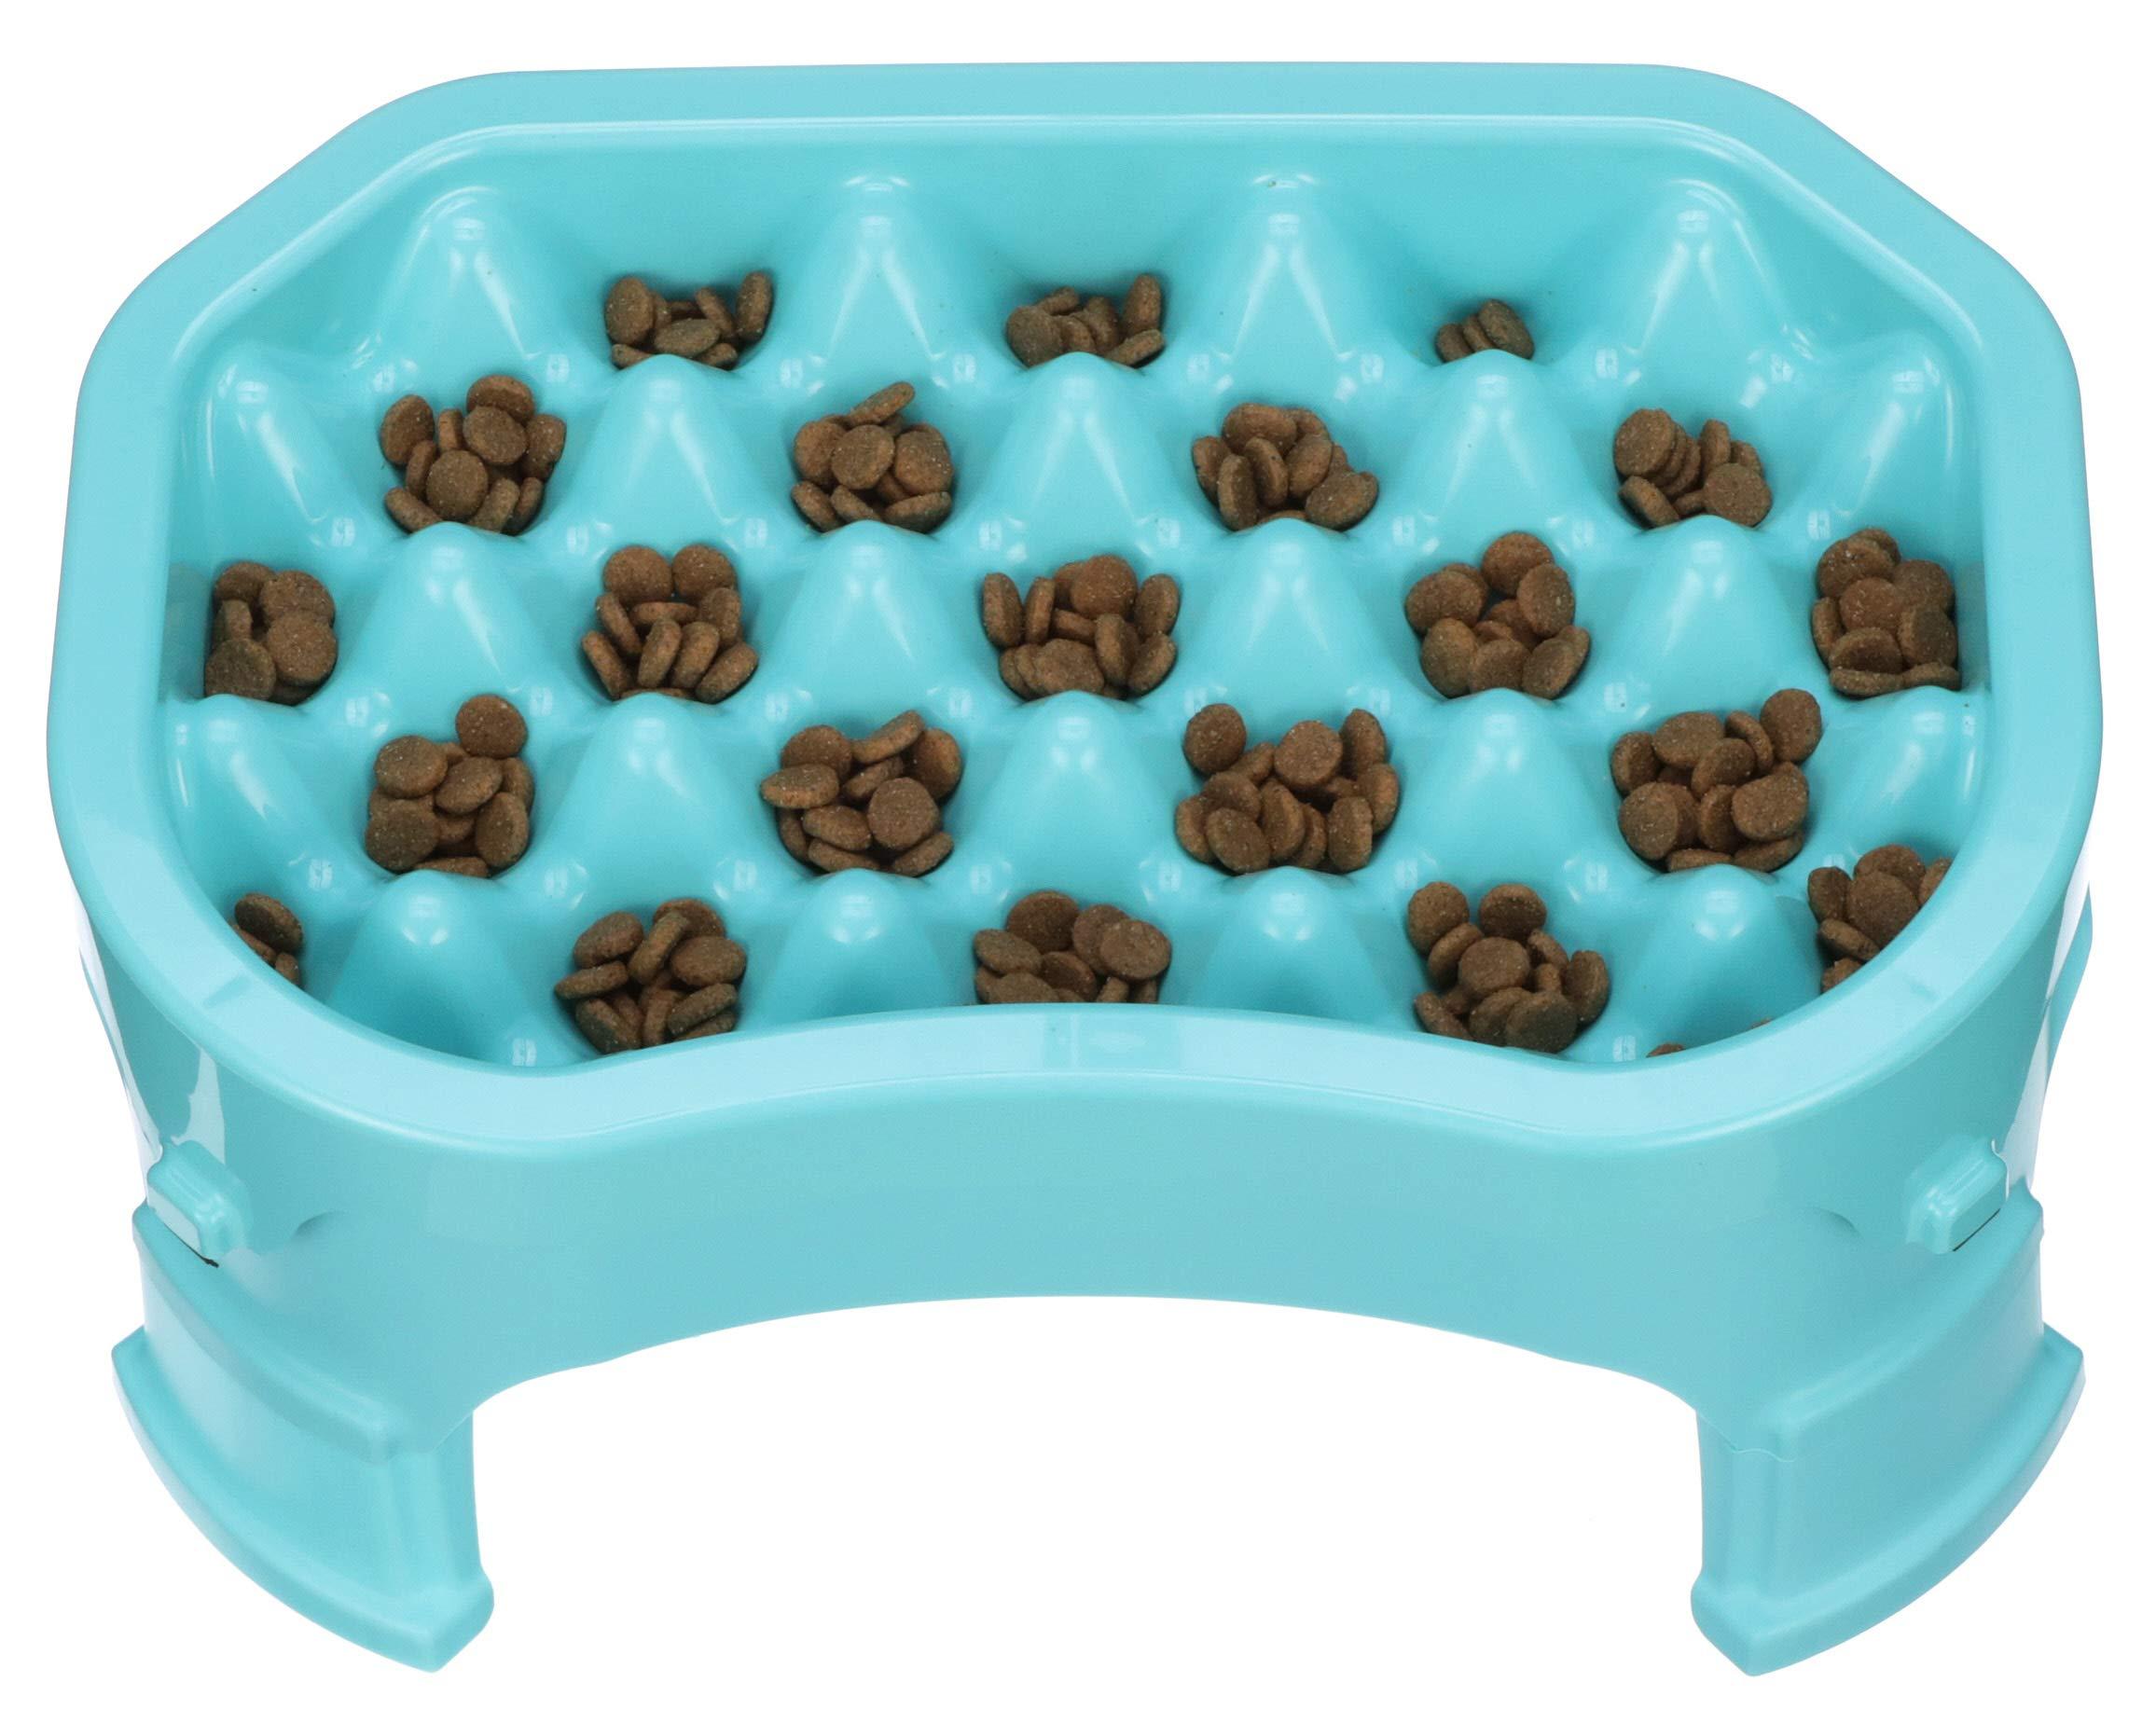 Buy Lick Mat for Dogs with Suction Cups,Dog Food Licking Mat,Slow Feeder  Dog Bowls for Boredom& Anxiety Reducer,Lick Pad for Dog & Cat Slow  Feeders,Help Pets for Bathing,Nail Trimming,Grooming Online at Low